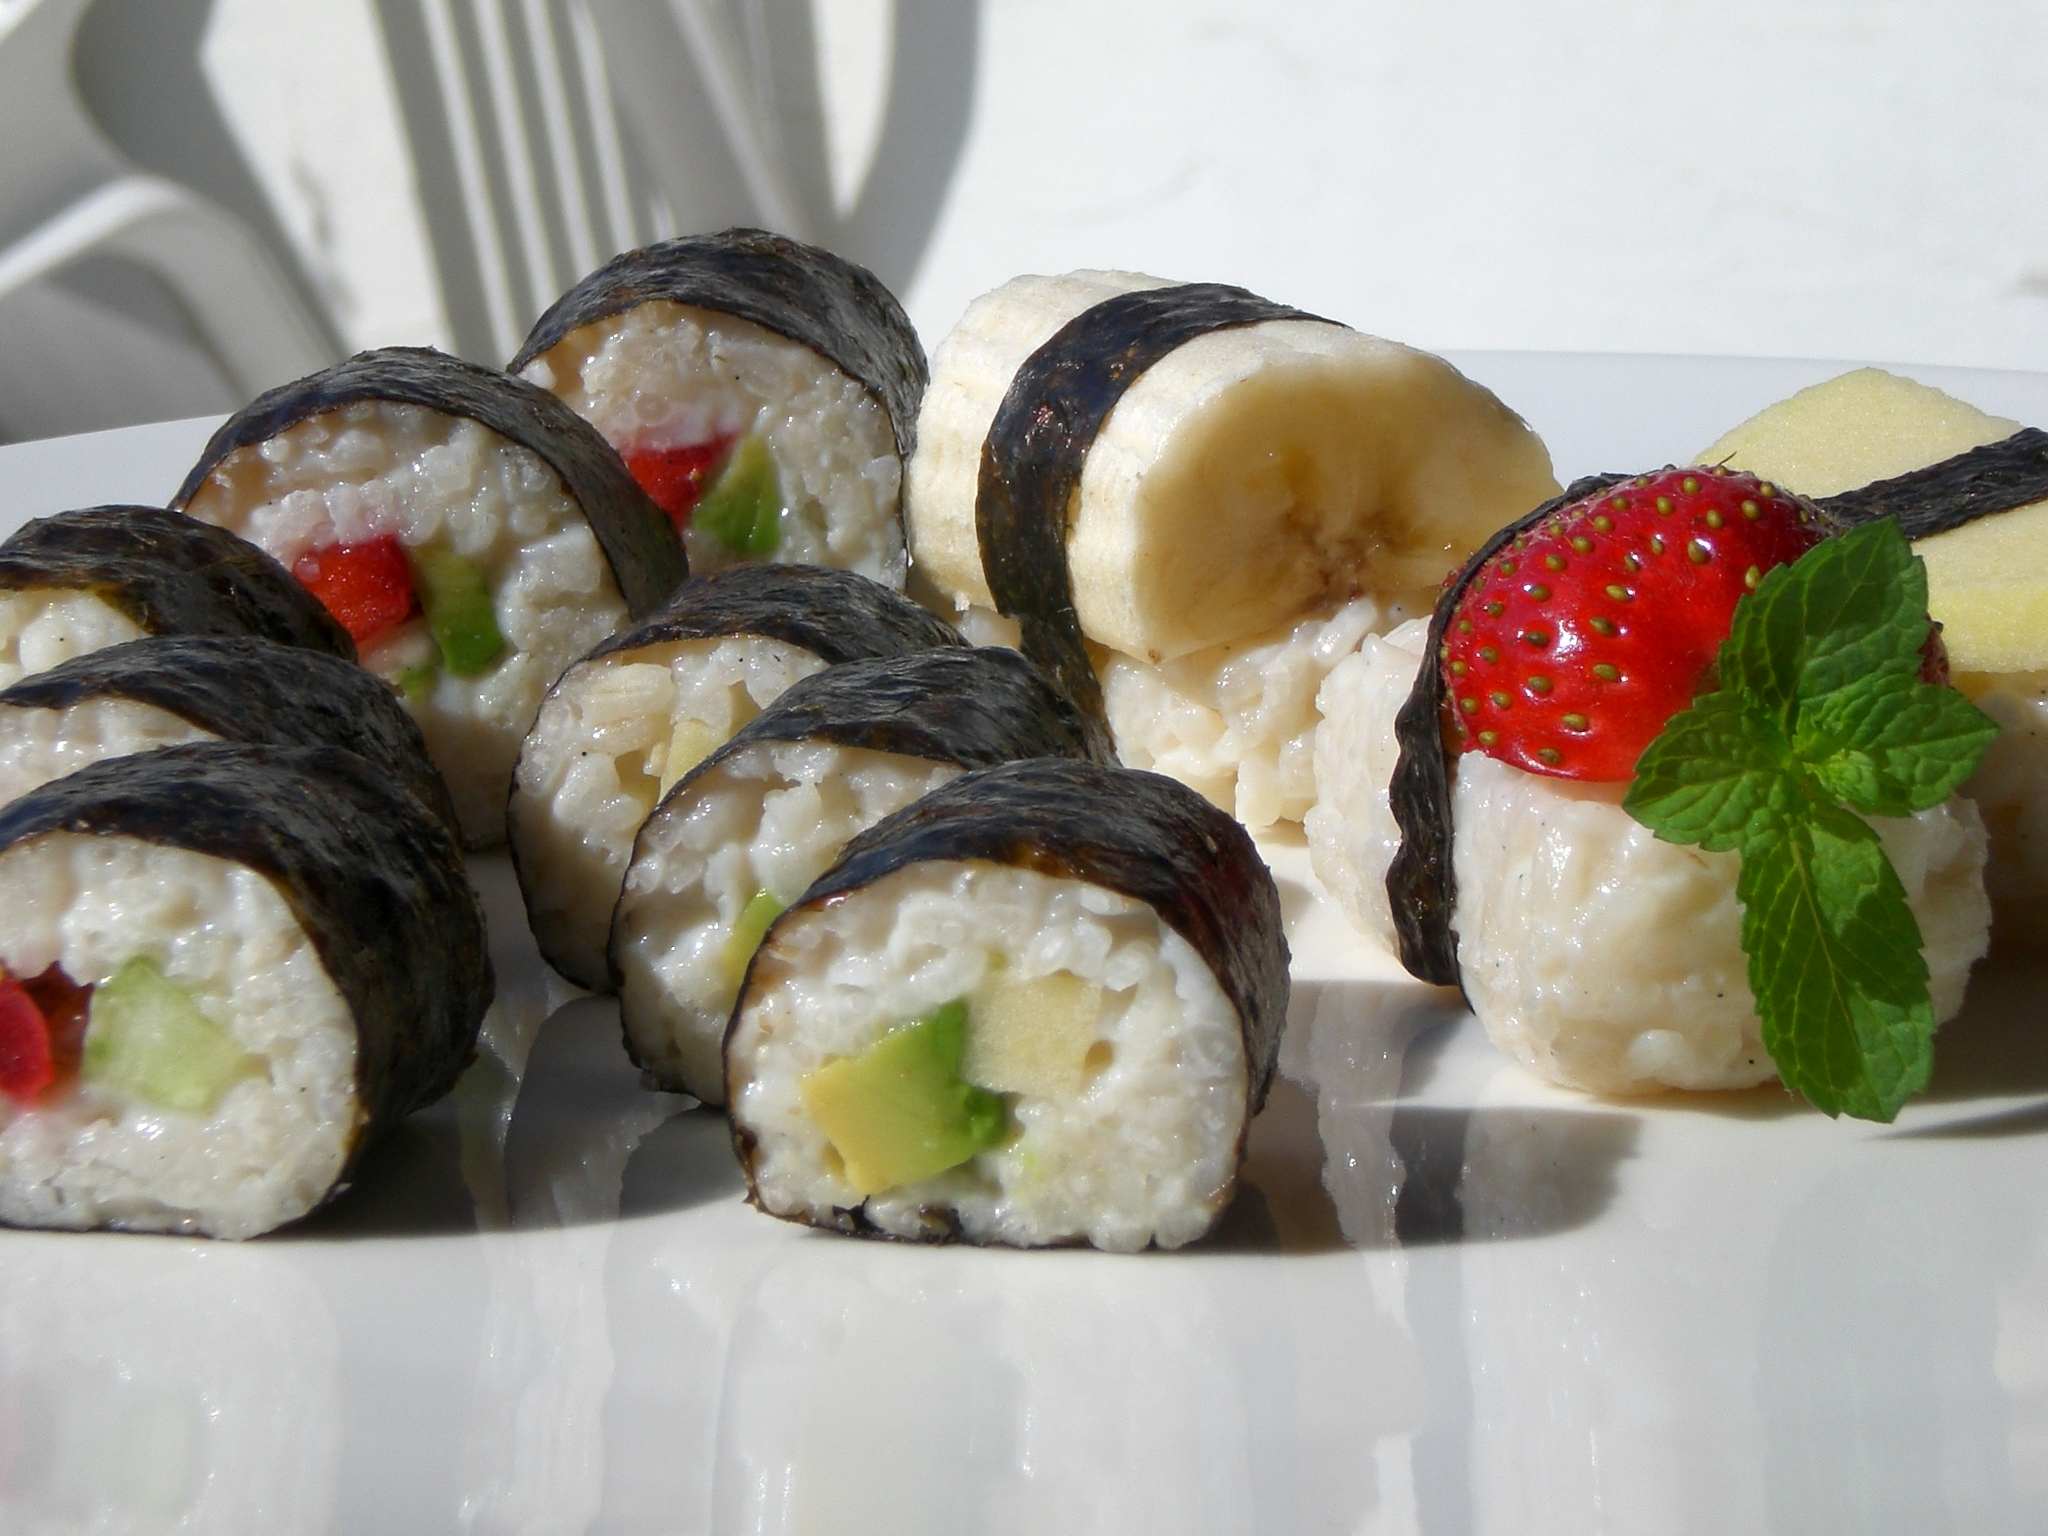 maki sushi on its side with cucumbers, strawberries, and mint leaves inside.